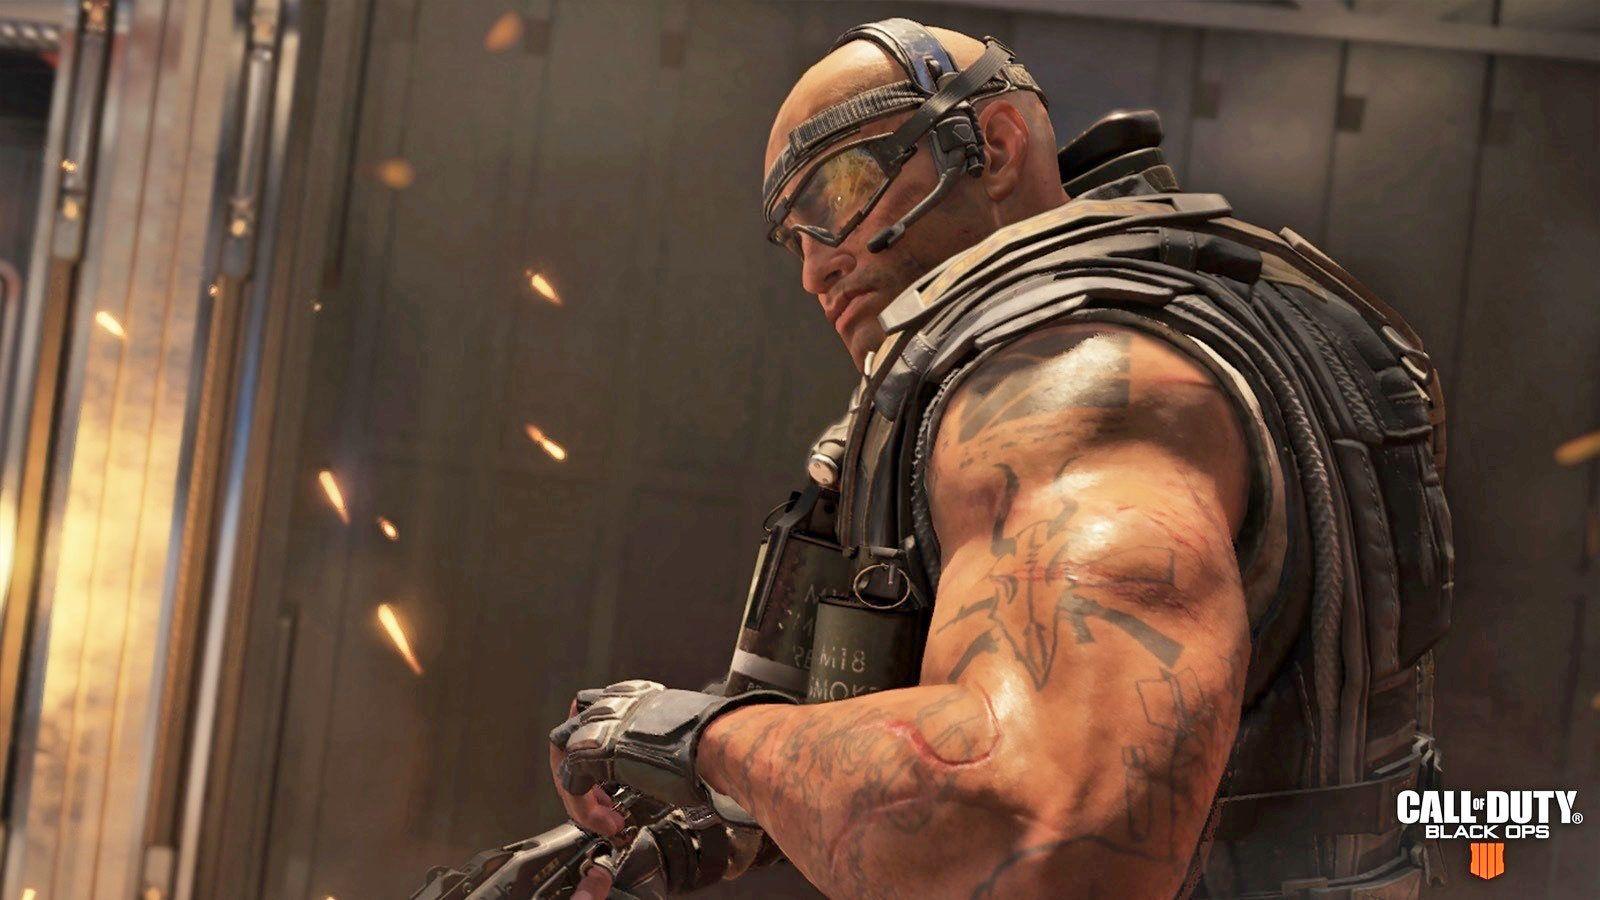 Call of Duty: Black Ops 4' beta tests begin August 3rd